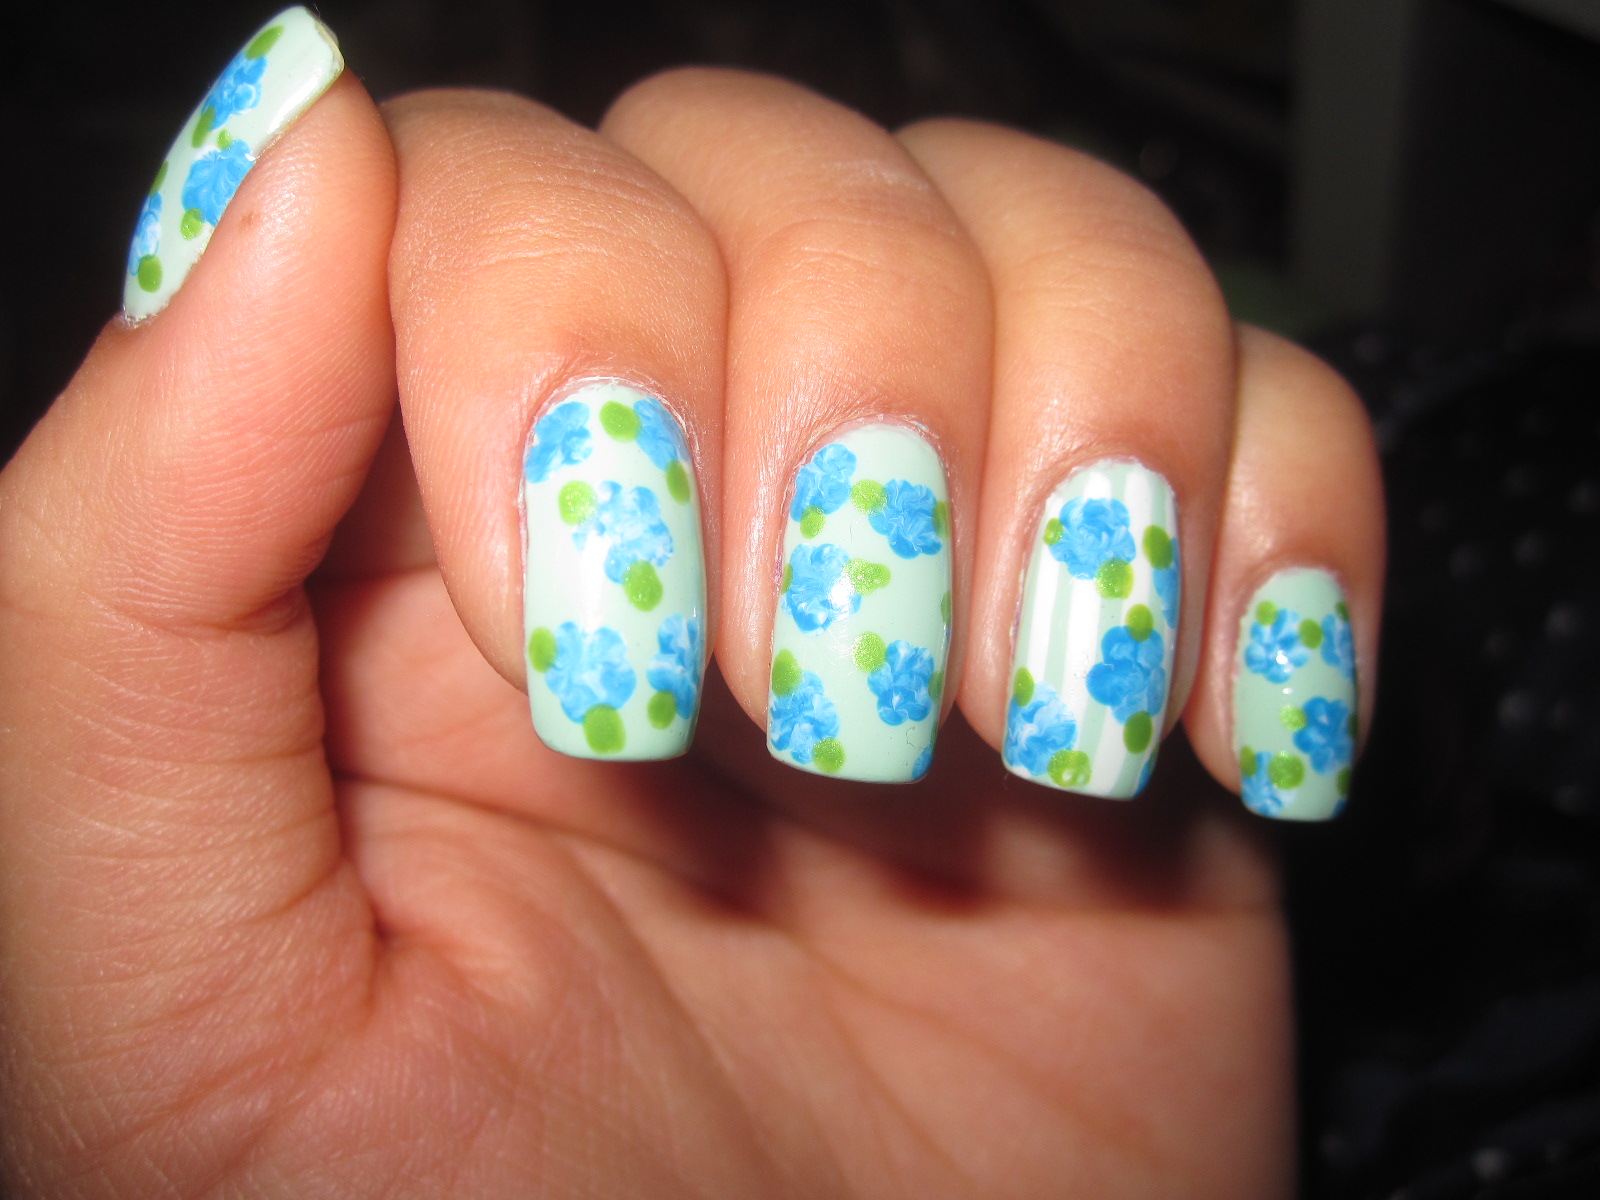 Jelly's Nails: Minted Floral Nails